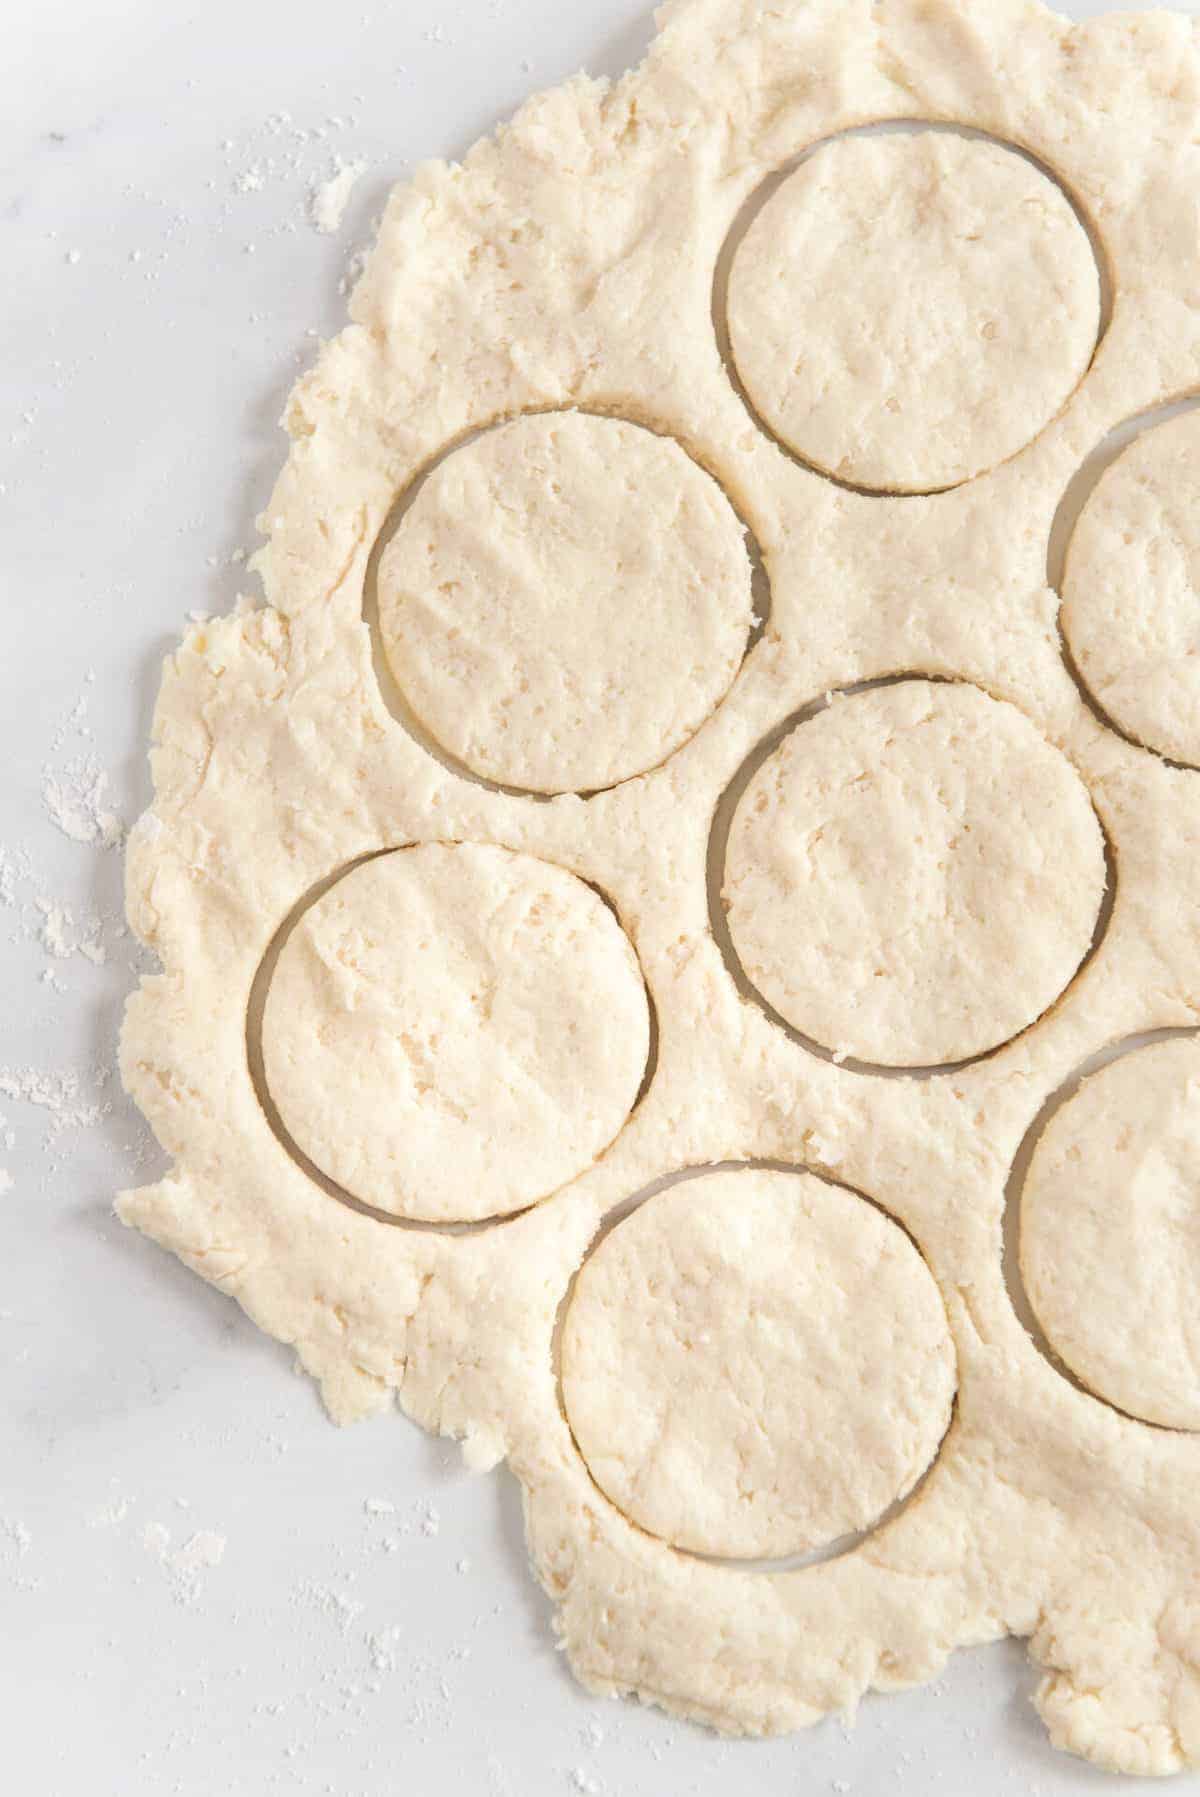 https://www.blessthismessplease.com/wp-content/uploads/2012/02/basic-butter-biscuits-8.jpg